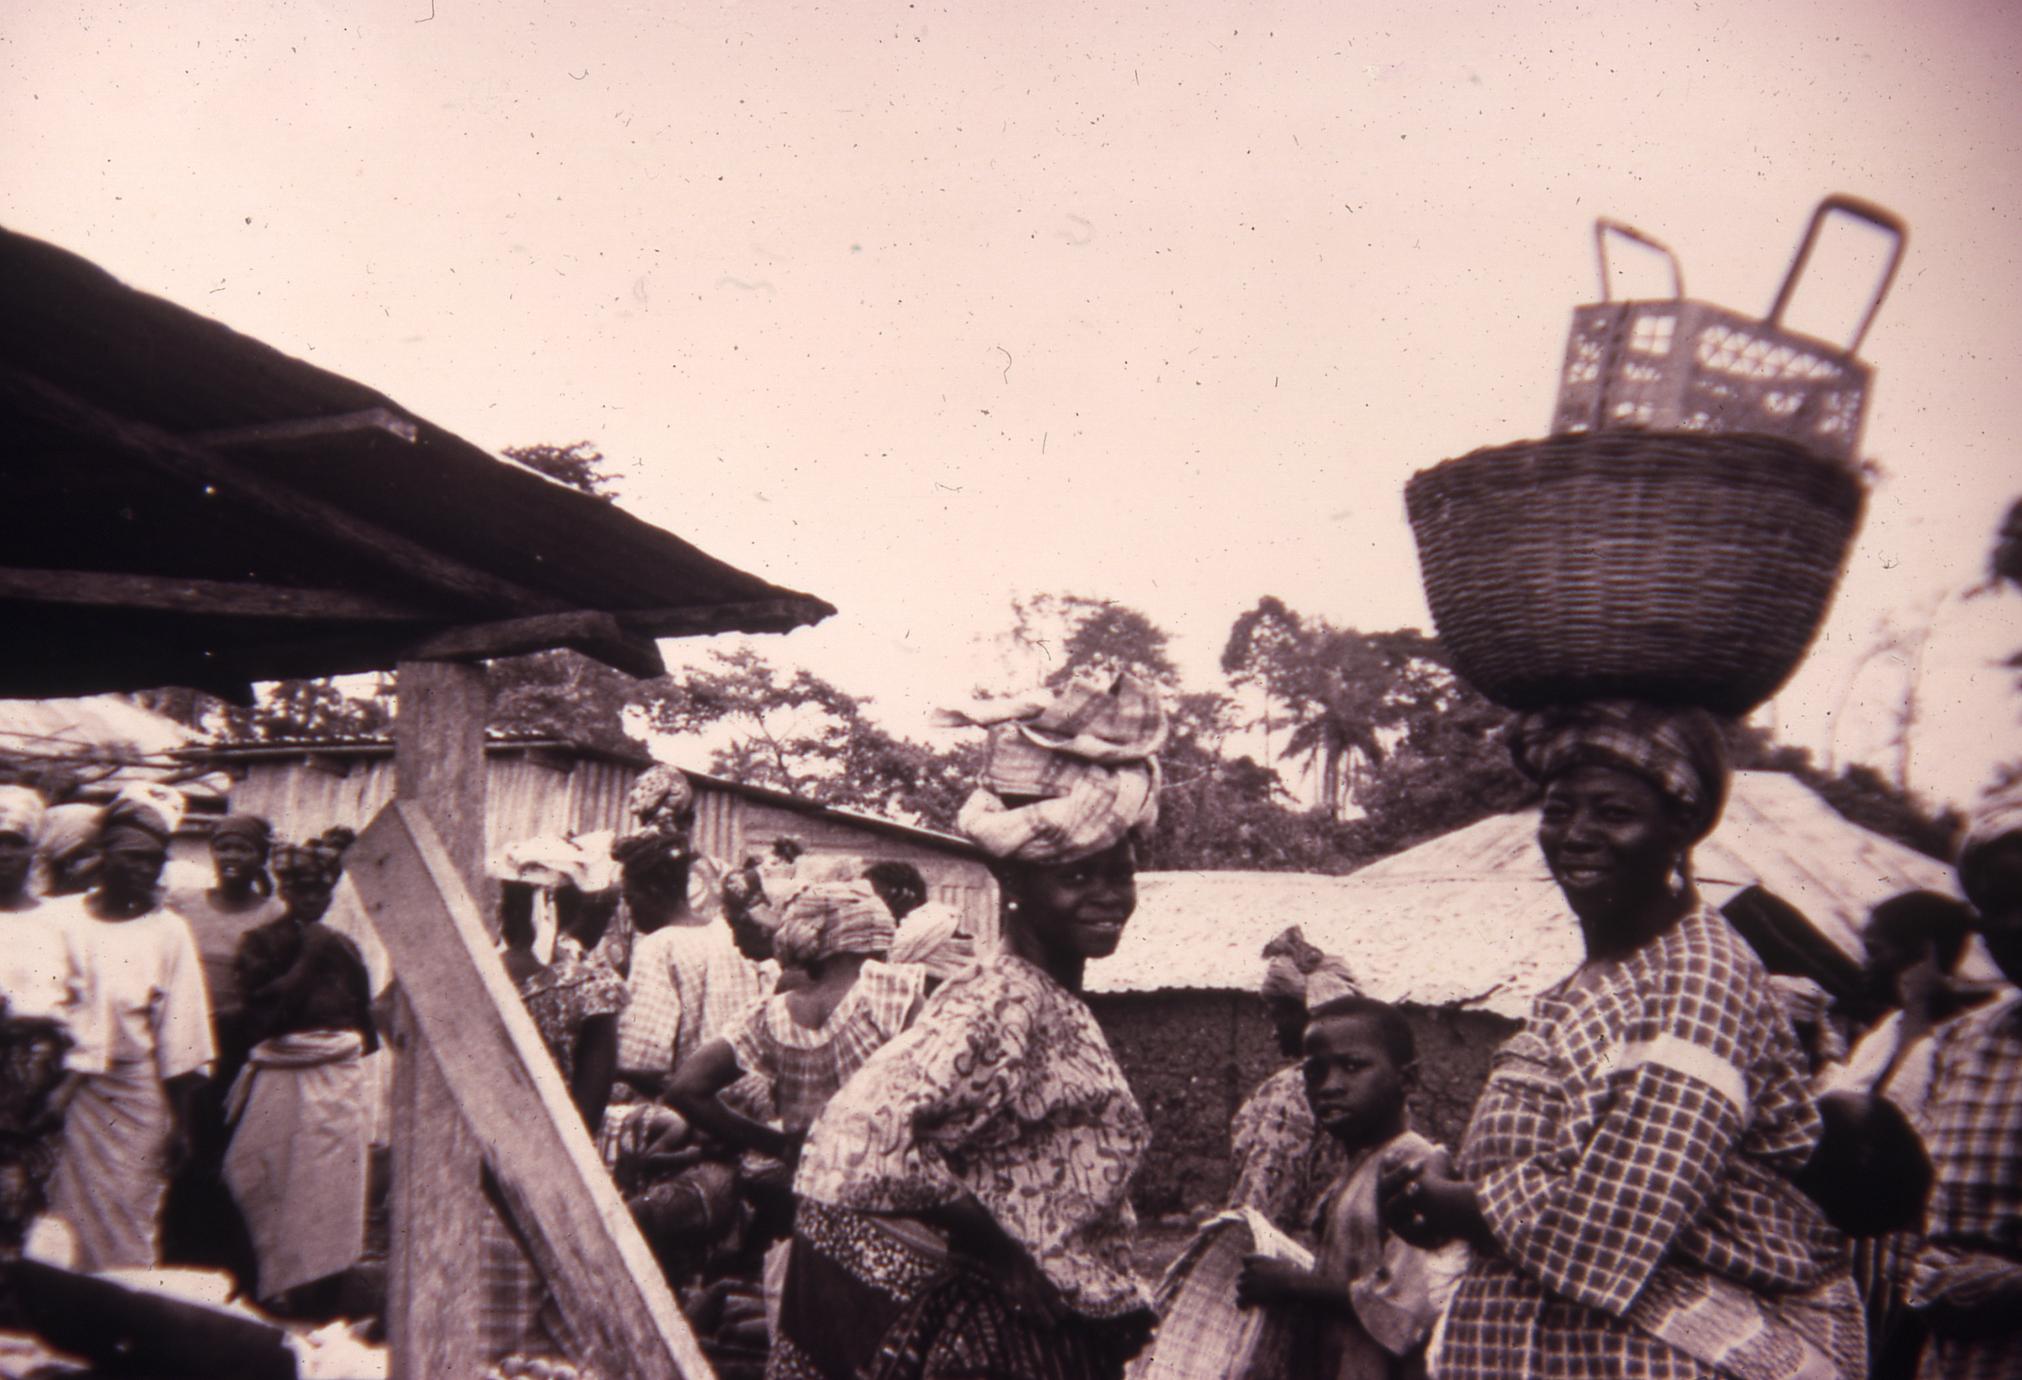 Crowd and woman with basket